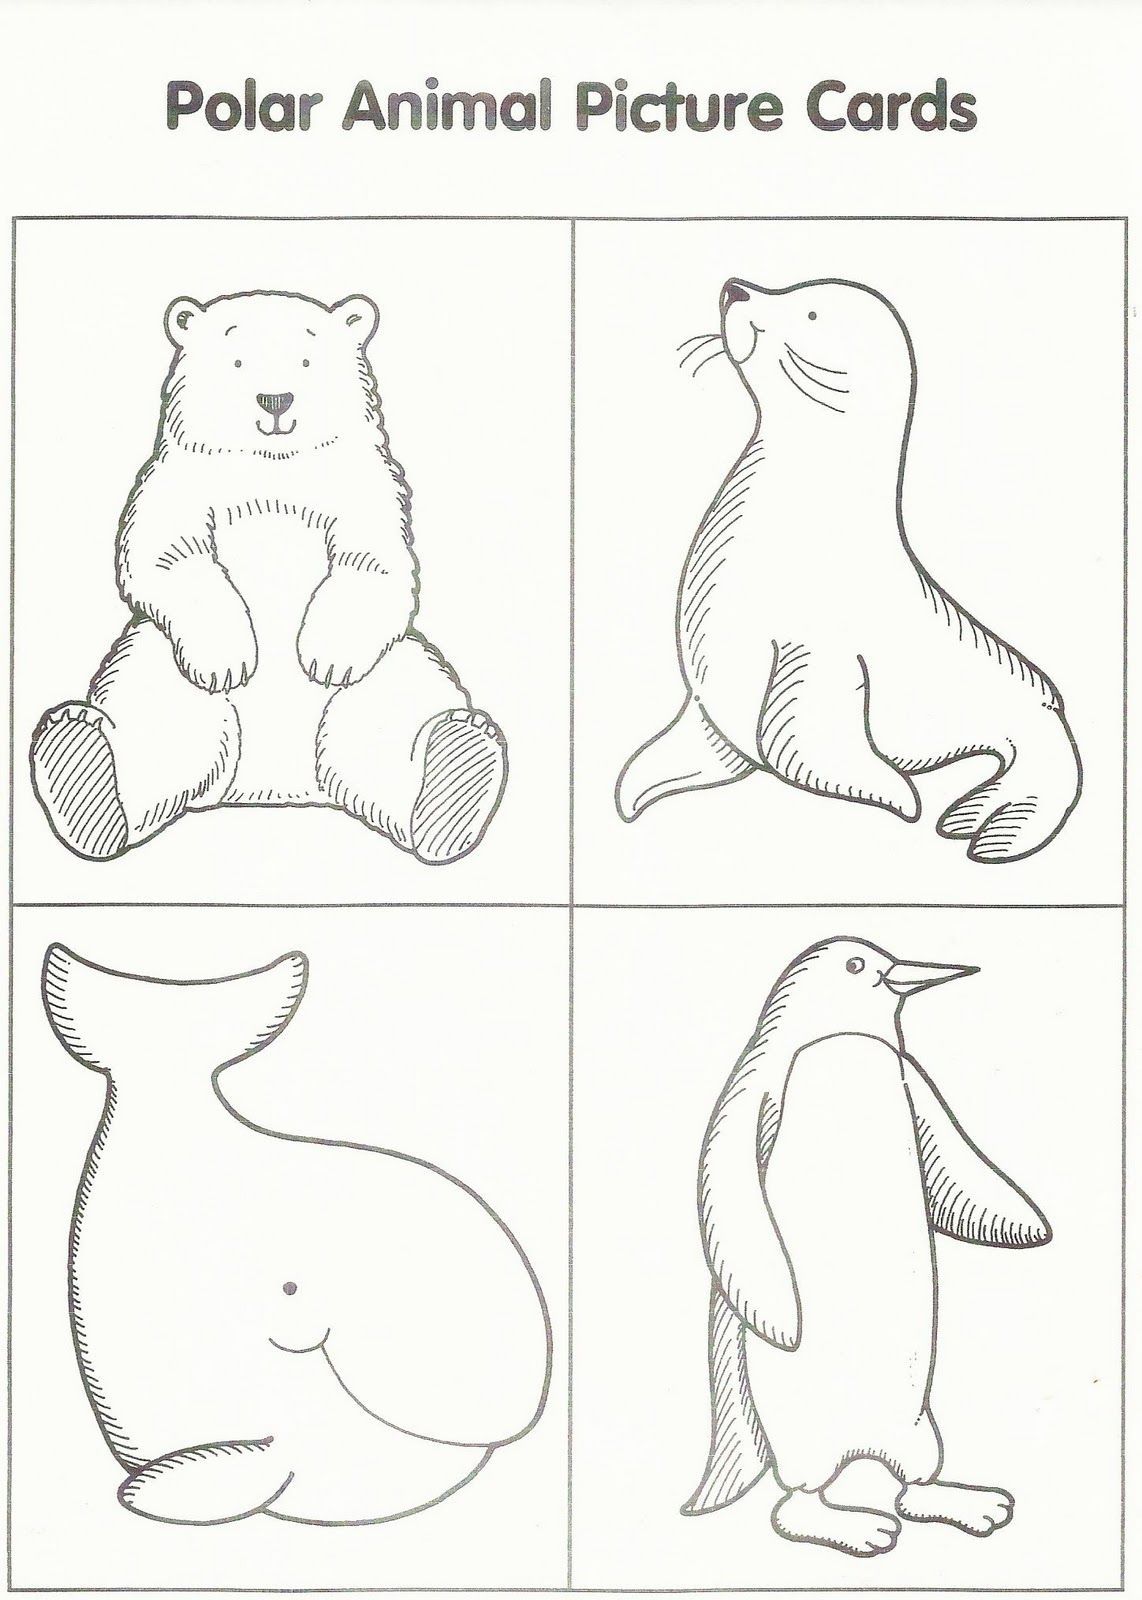 Download or print this amazing coloring page arctic animals coloring pages polar animals arctic animals artic animals